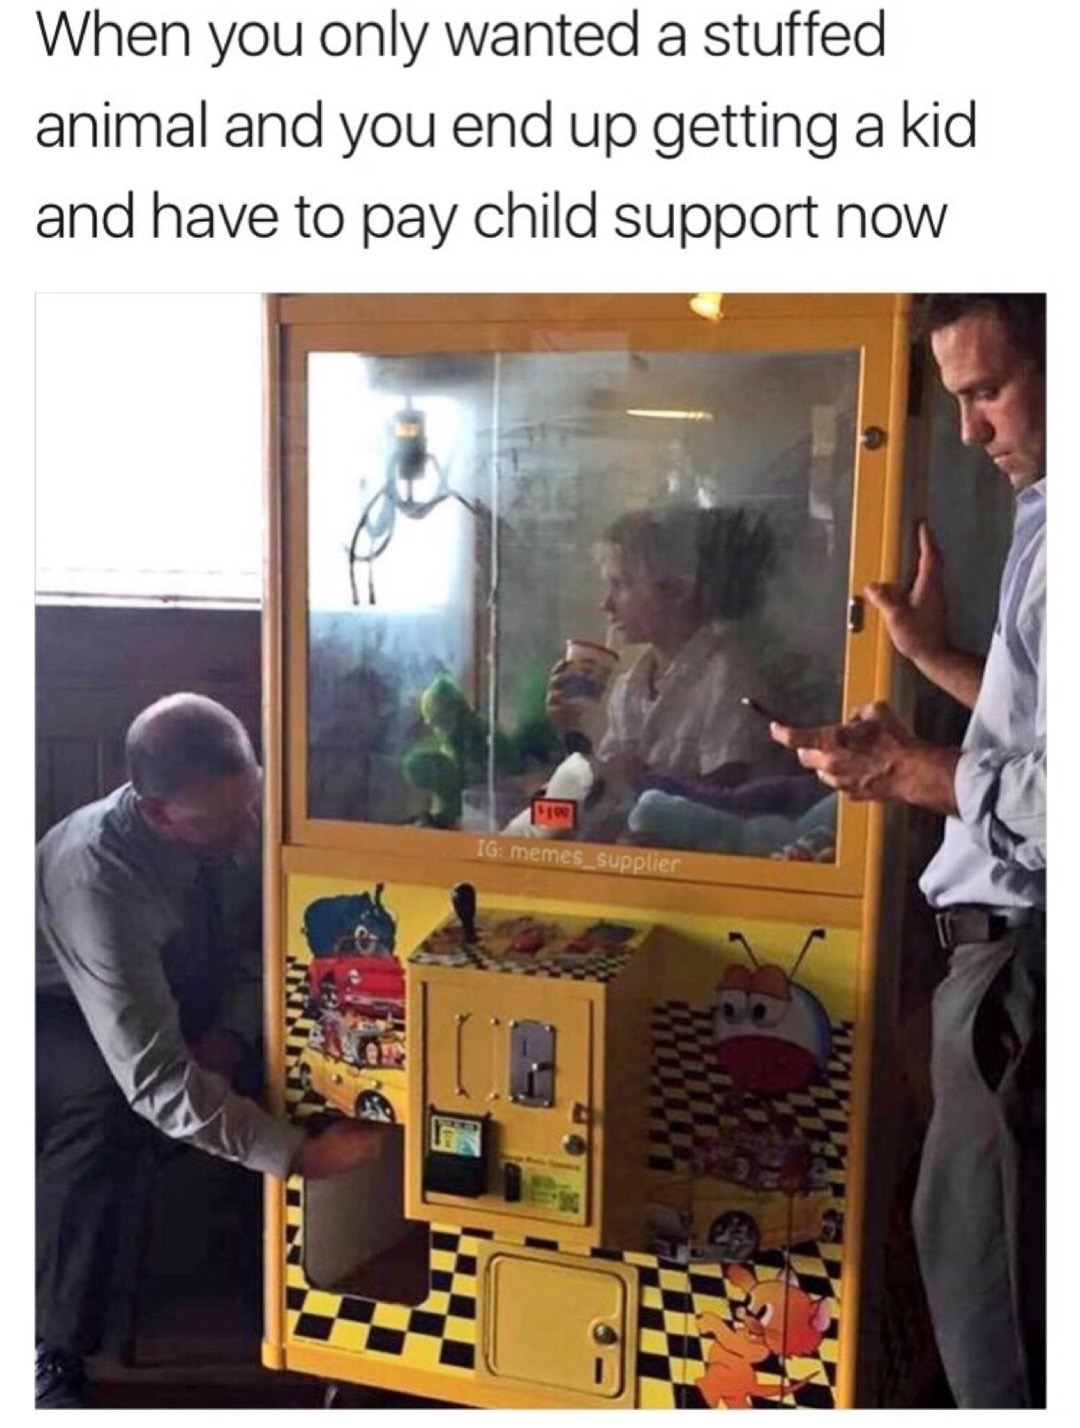 Meme of just wanting a stuffed animal and there is a kid in that machine.